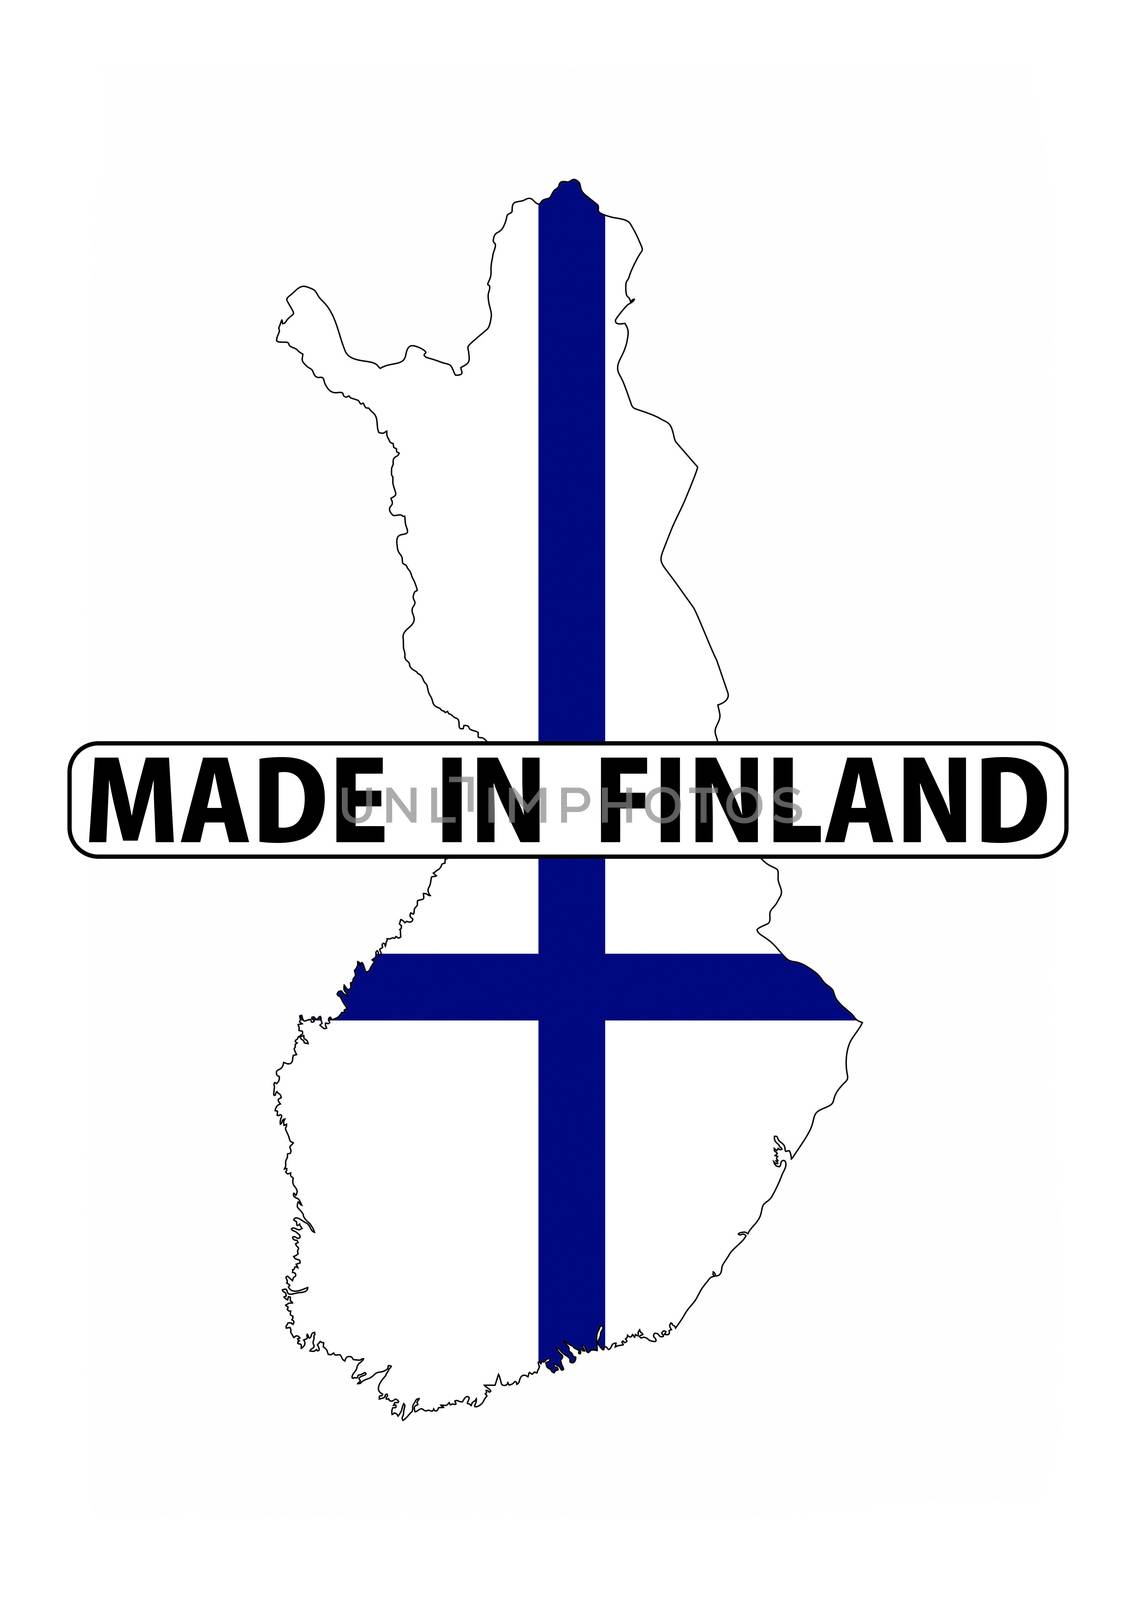 made in finland by tony4urban